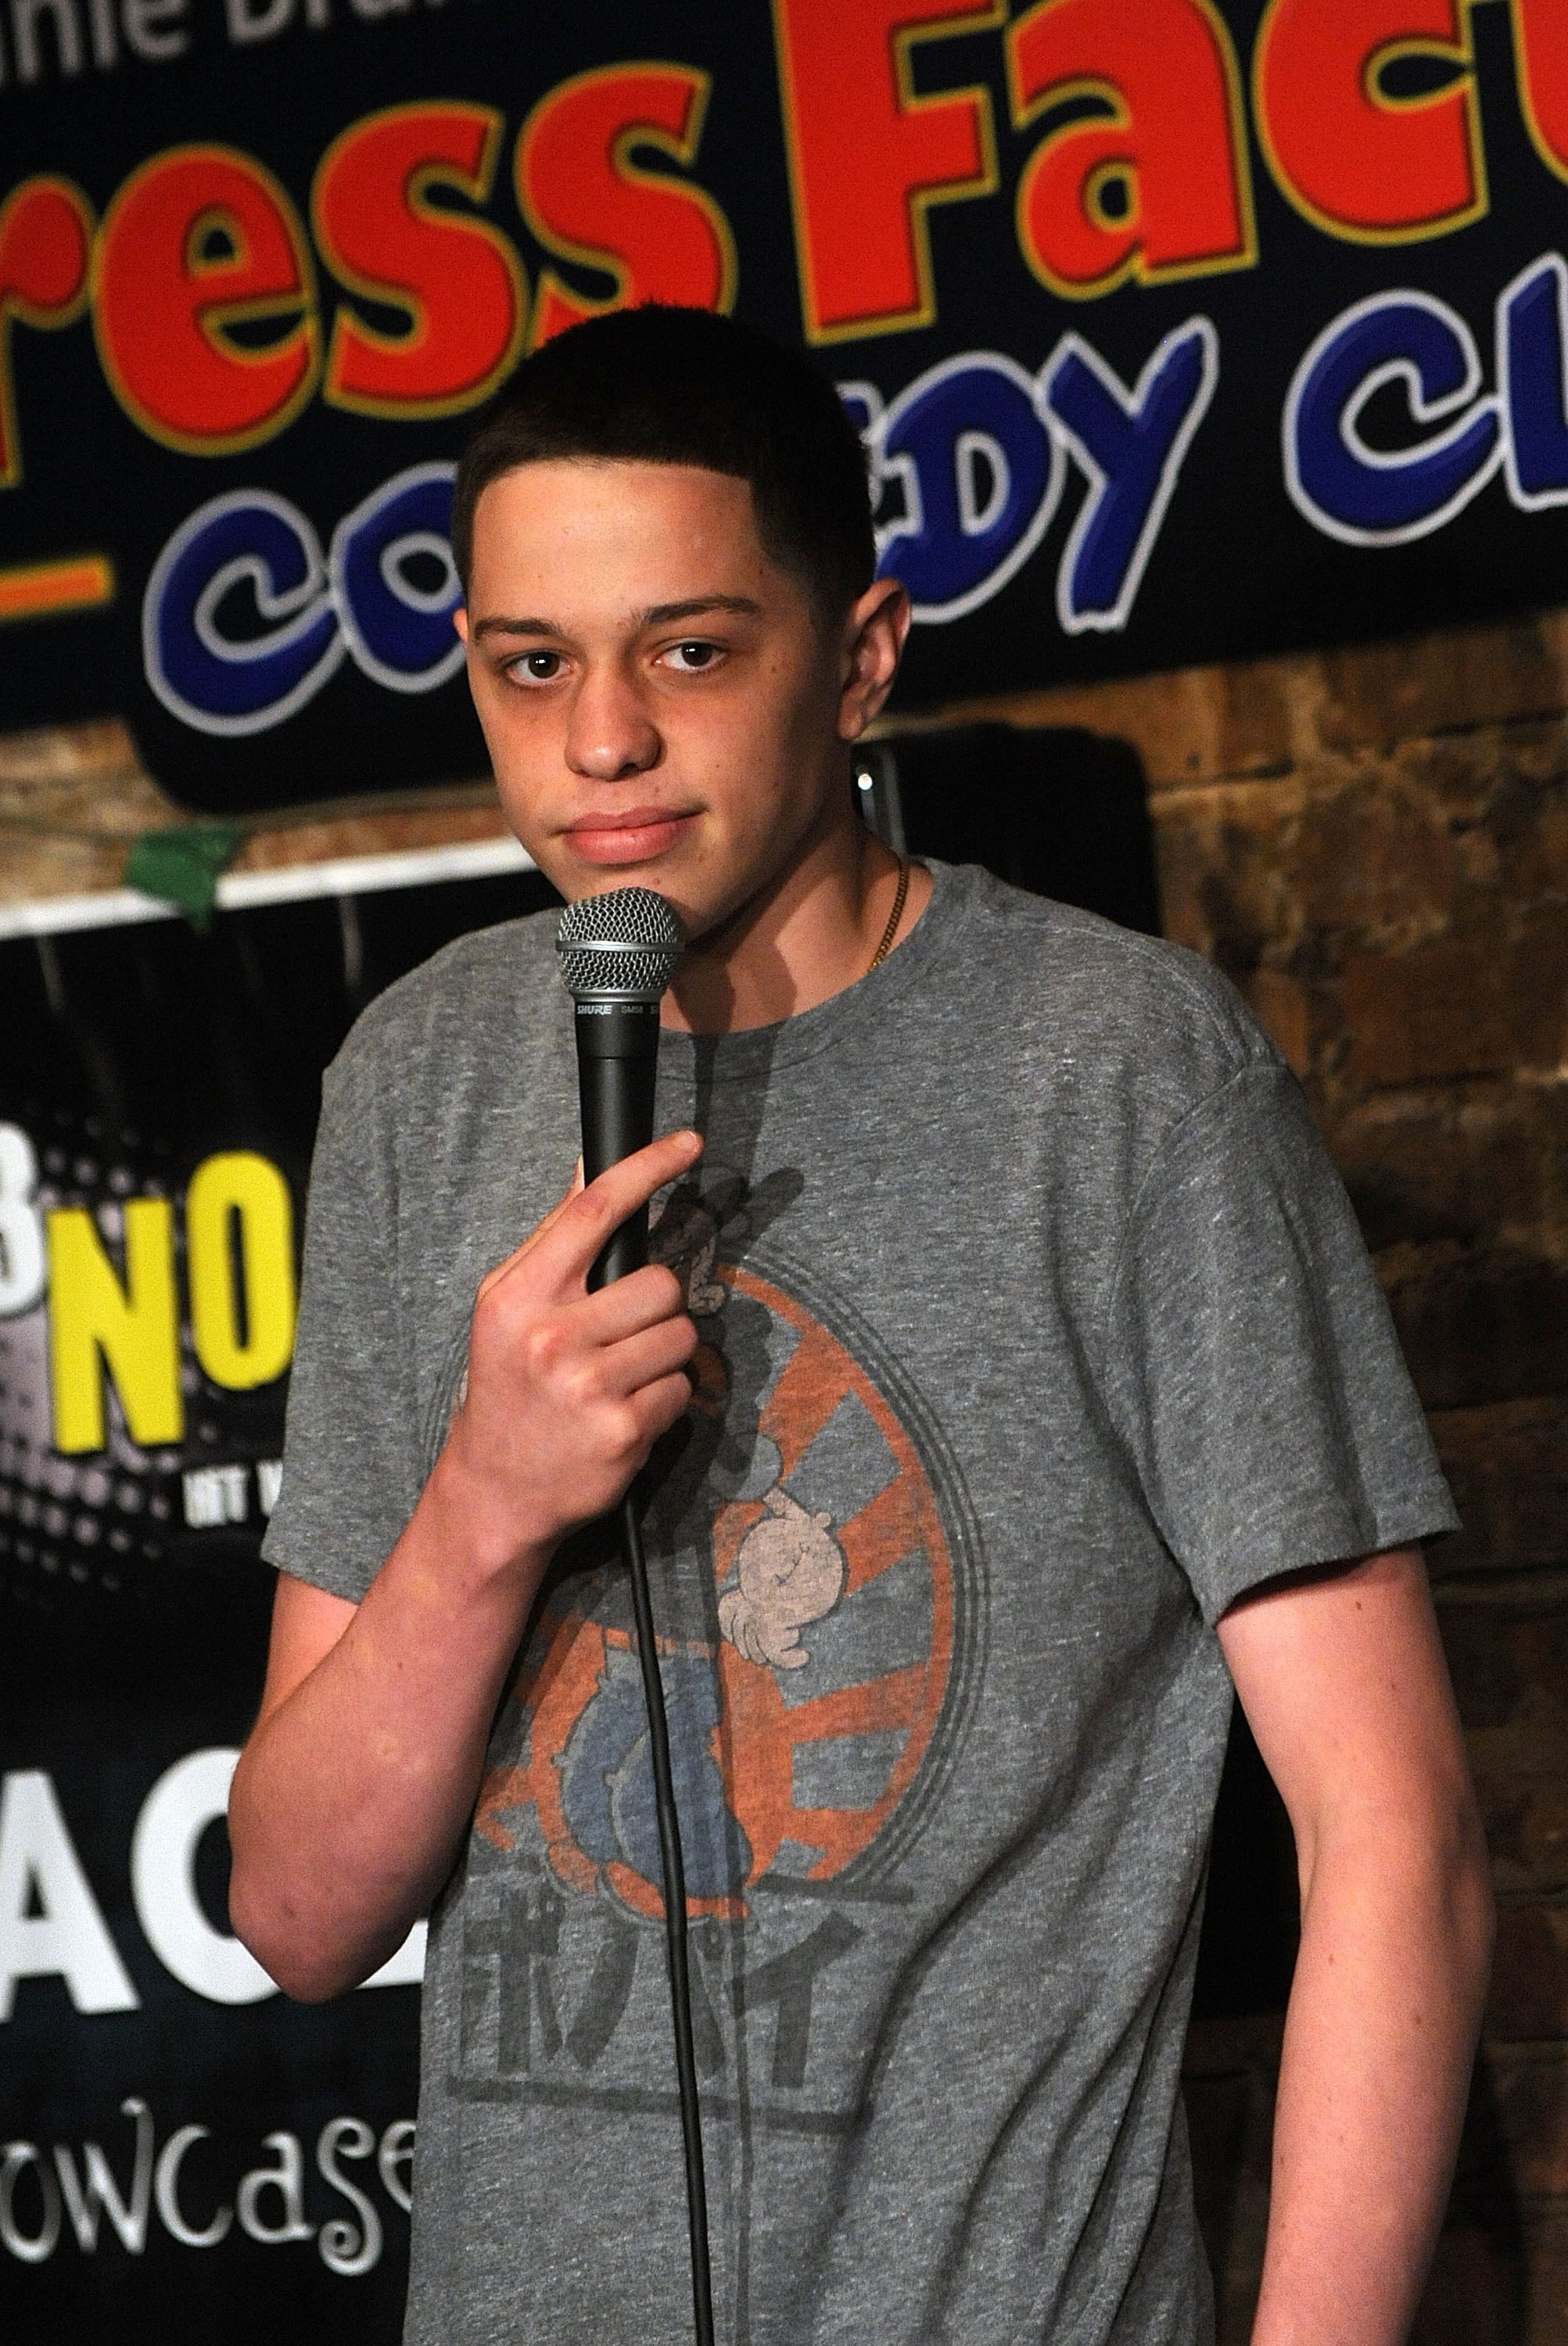 NEW BRUNSWICK, NJ - AUGUST 04:  Comedian Pete Davidson performs at The Stress Factory Comedy Club on August 4, 2011 in New Brunswick, New Jersey.  (Photo by Bobby Bank/WireImage)